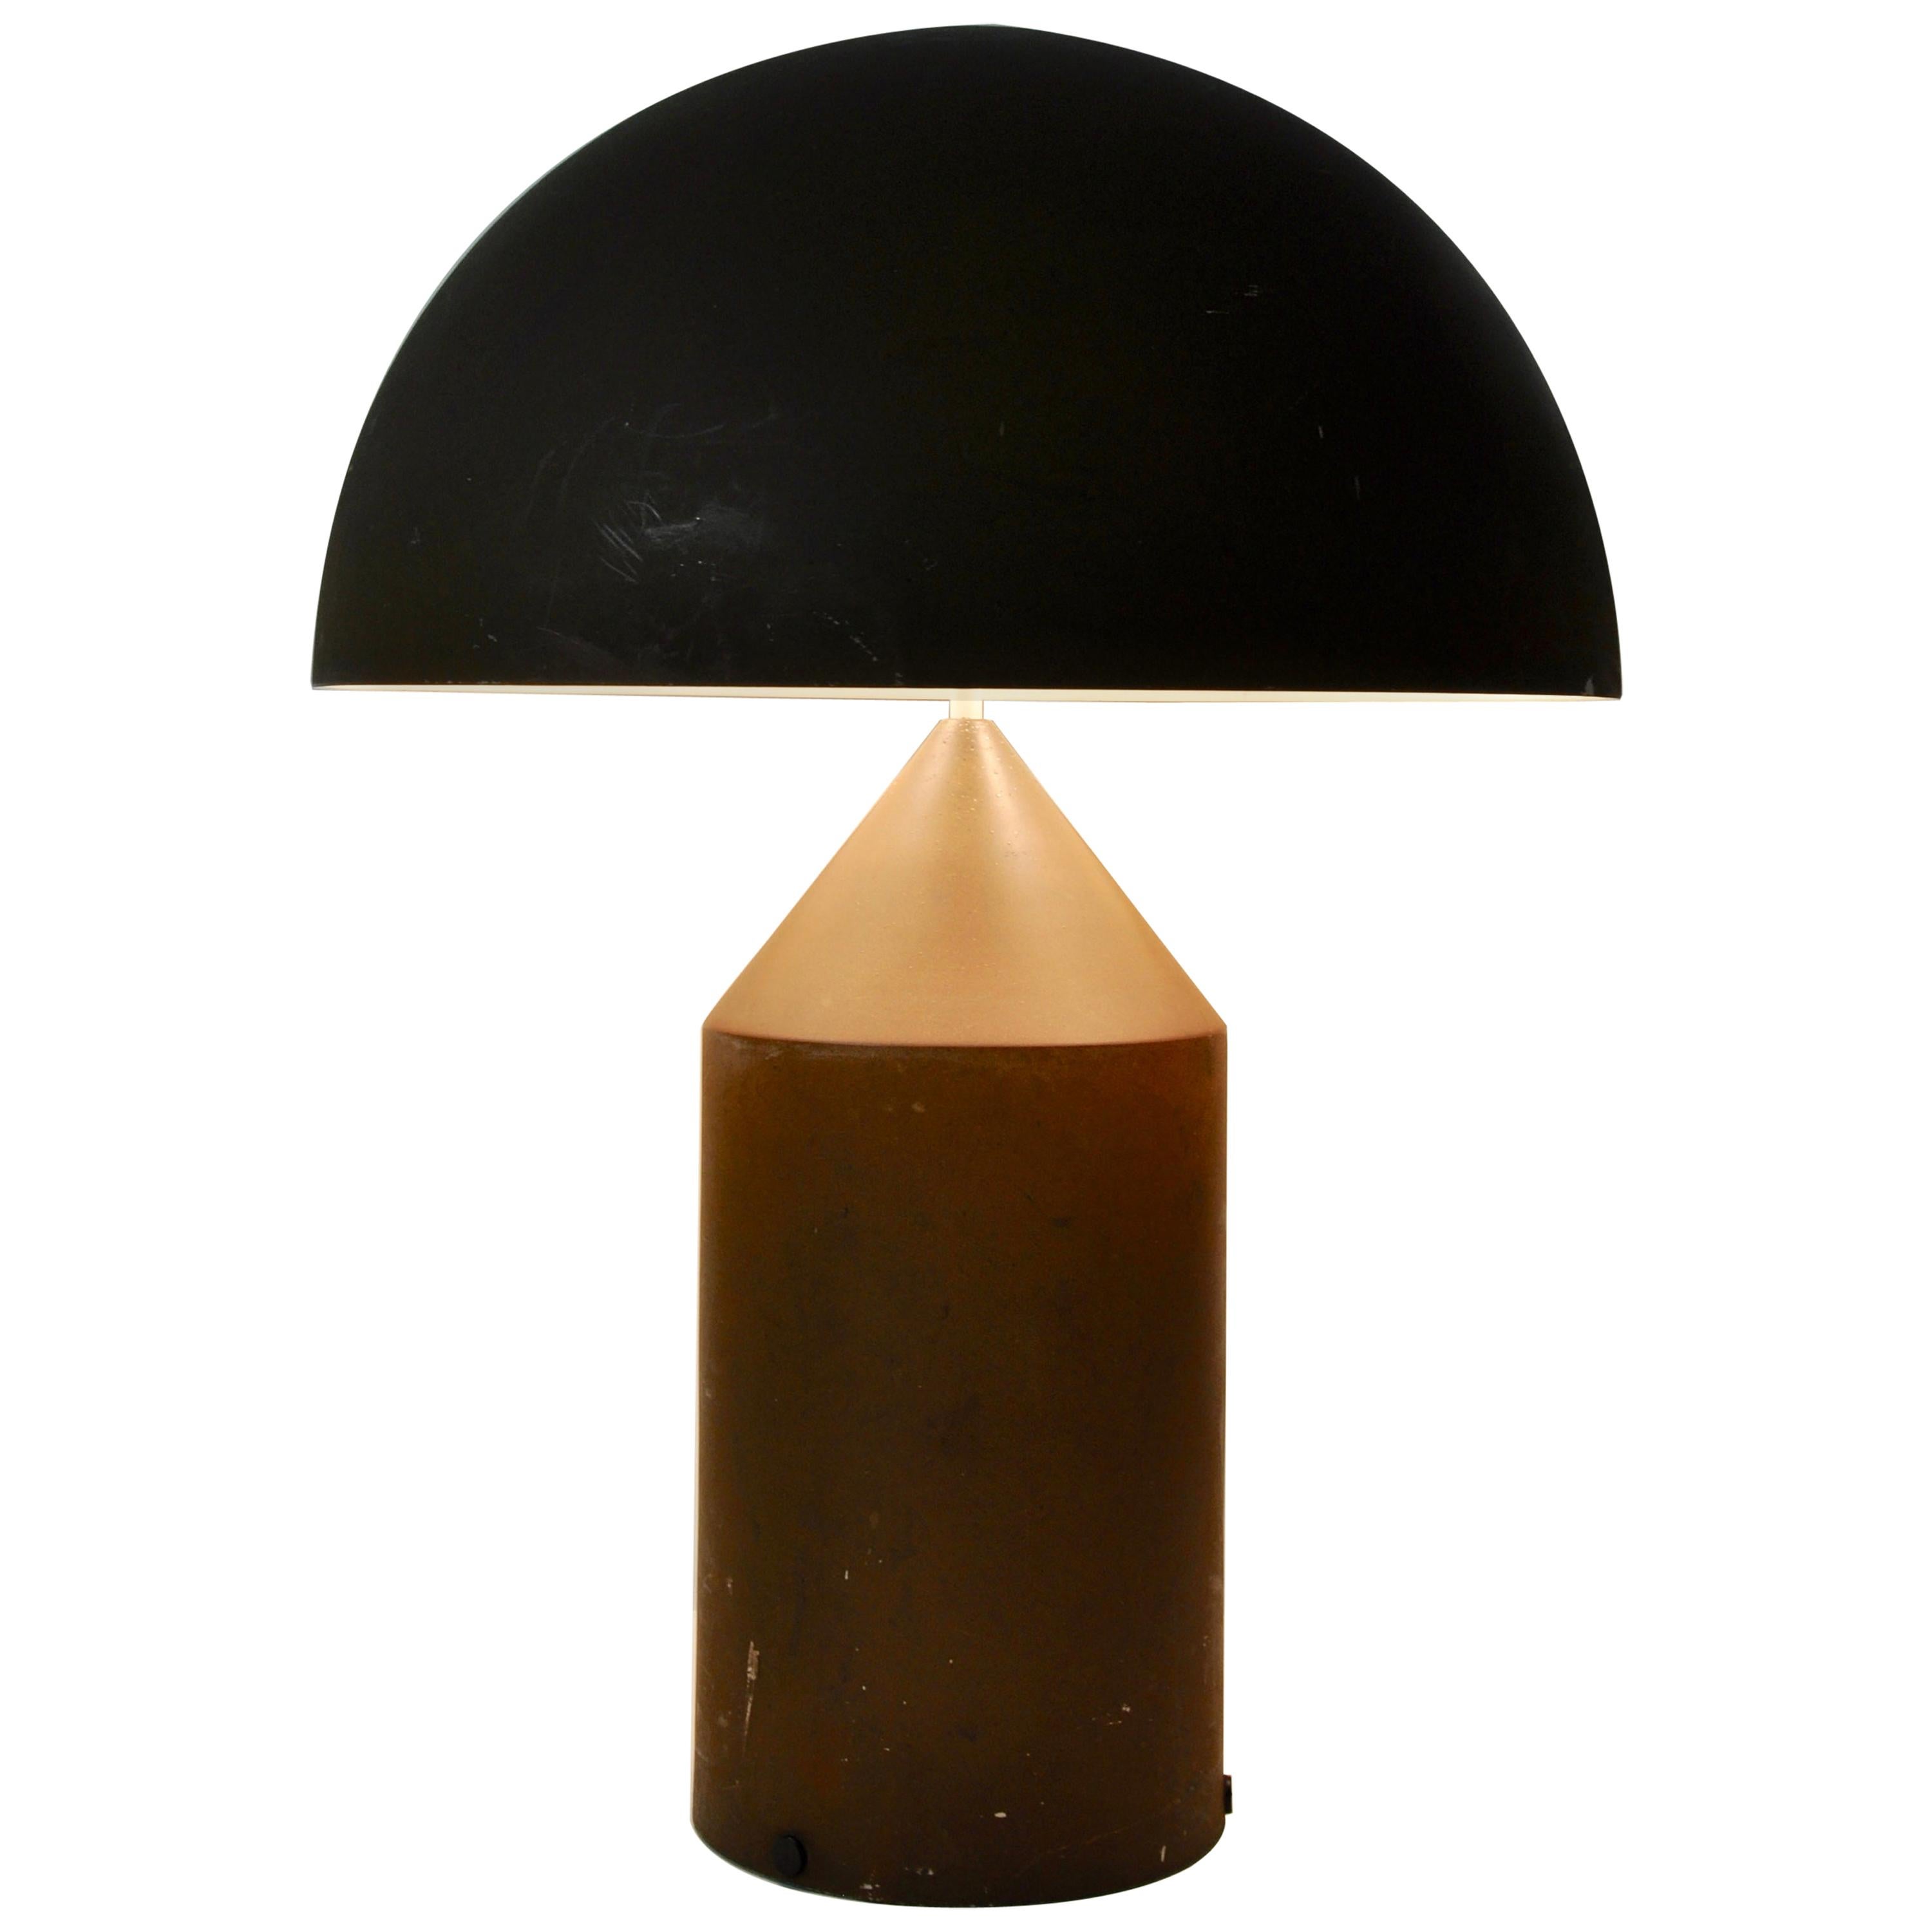 Large Atollo Table Lamp by Vico Magistretti for Oluce, 1960s